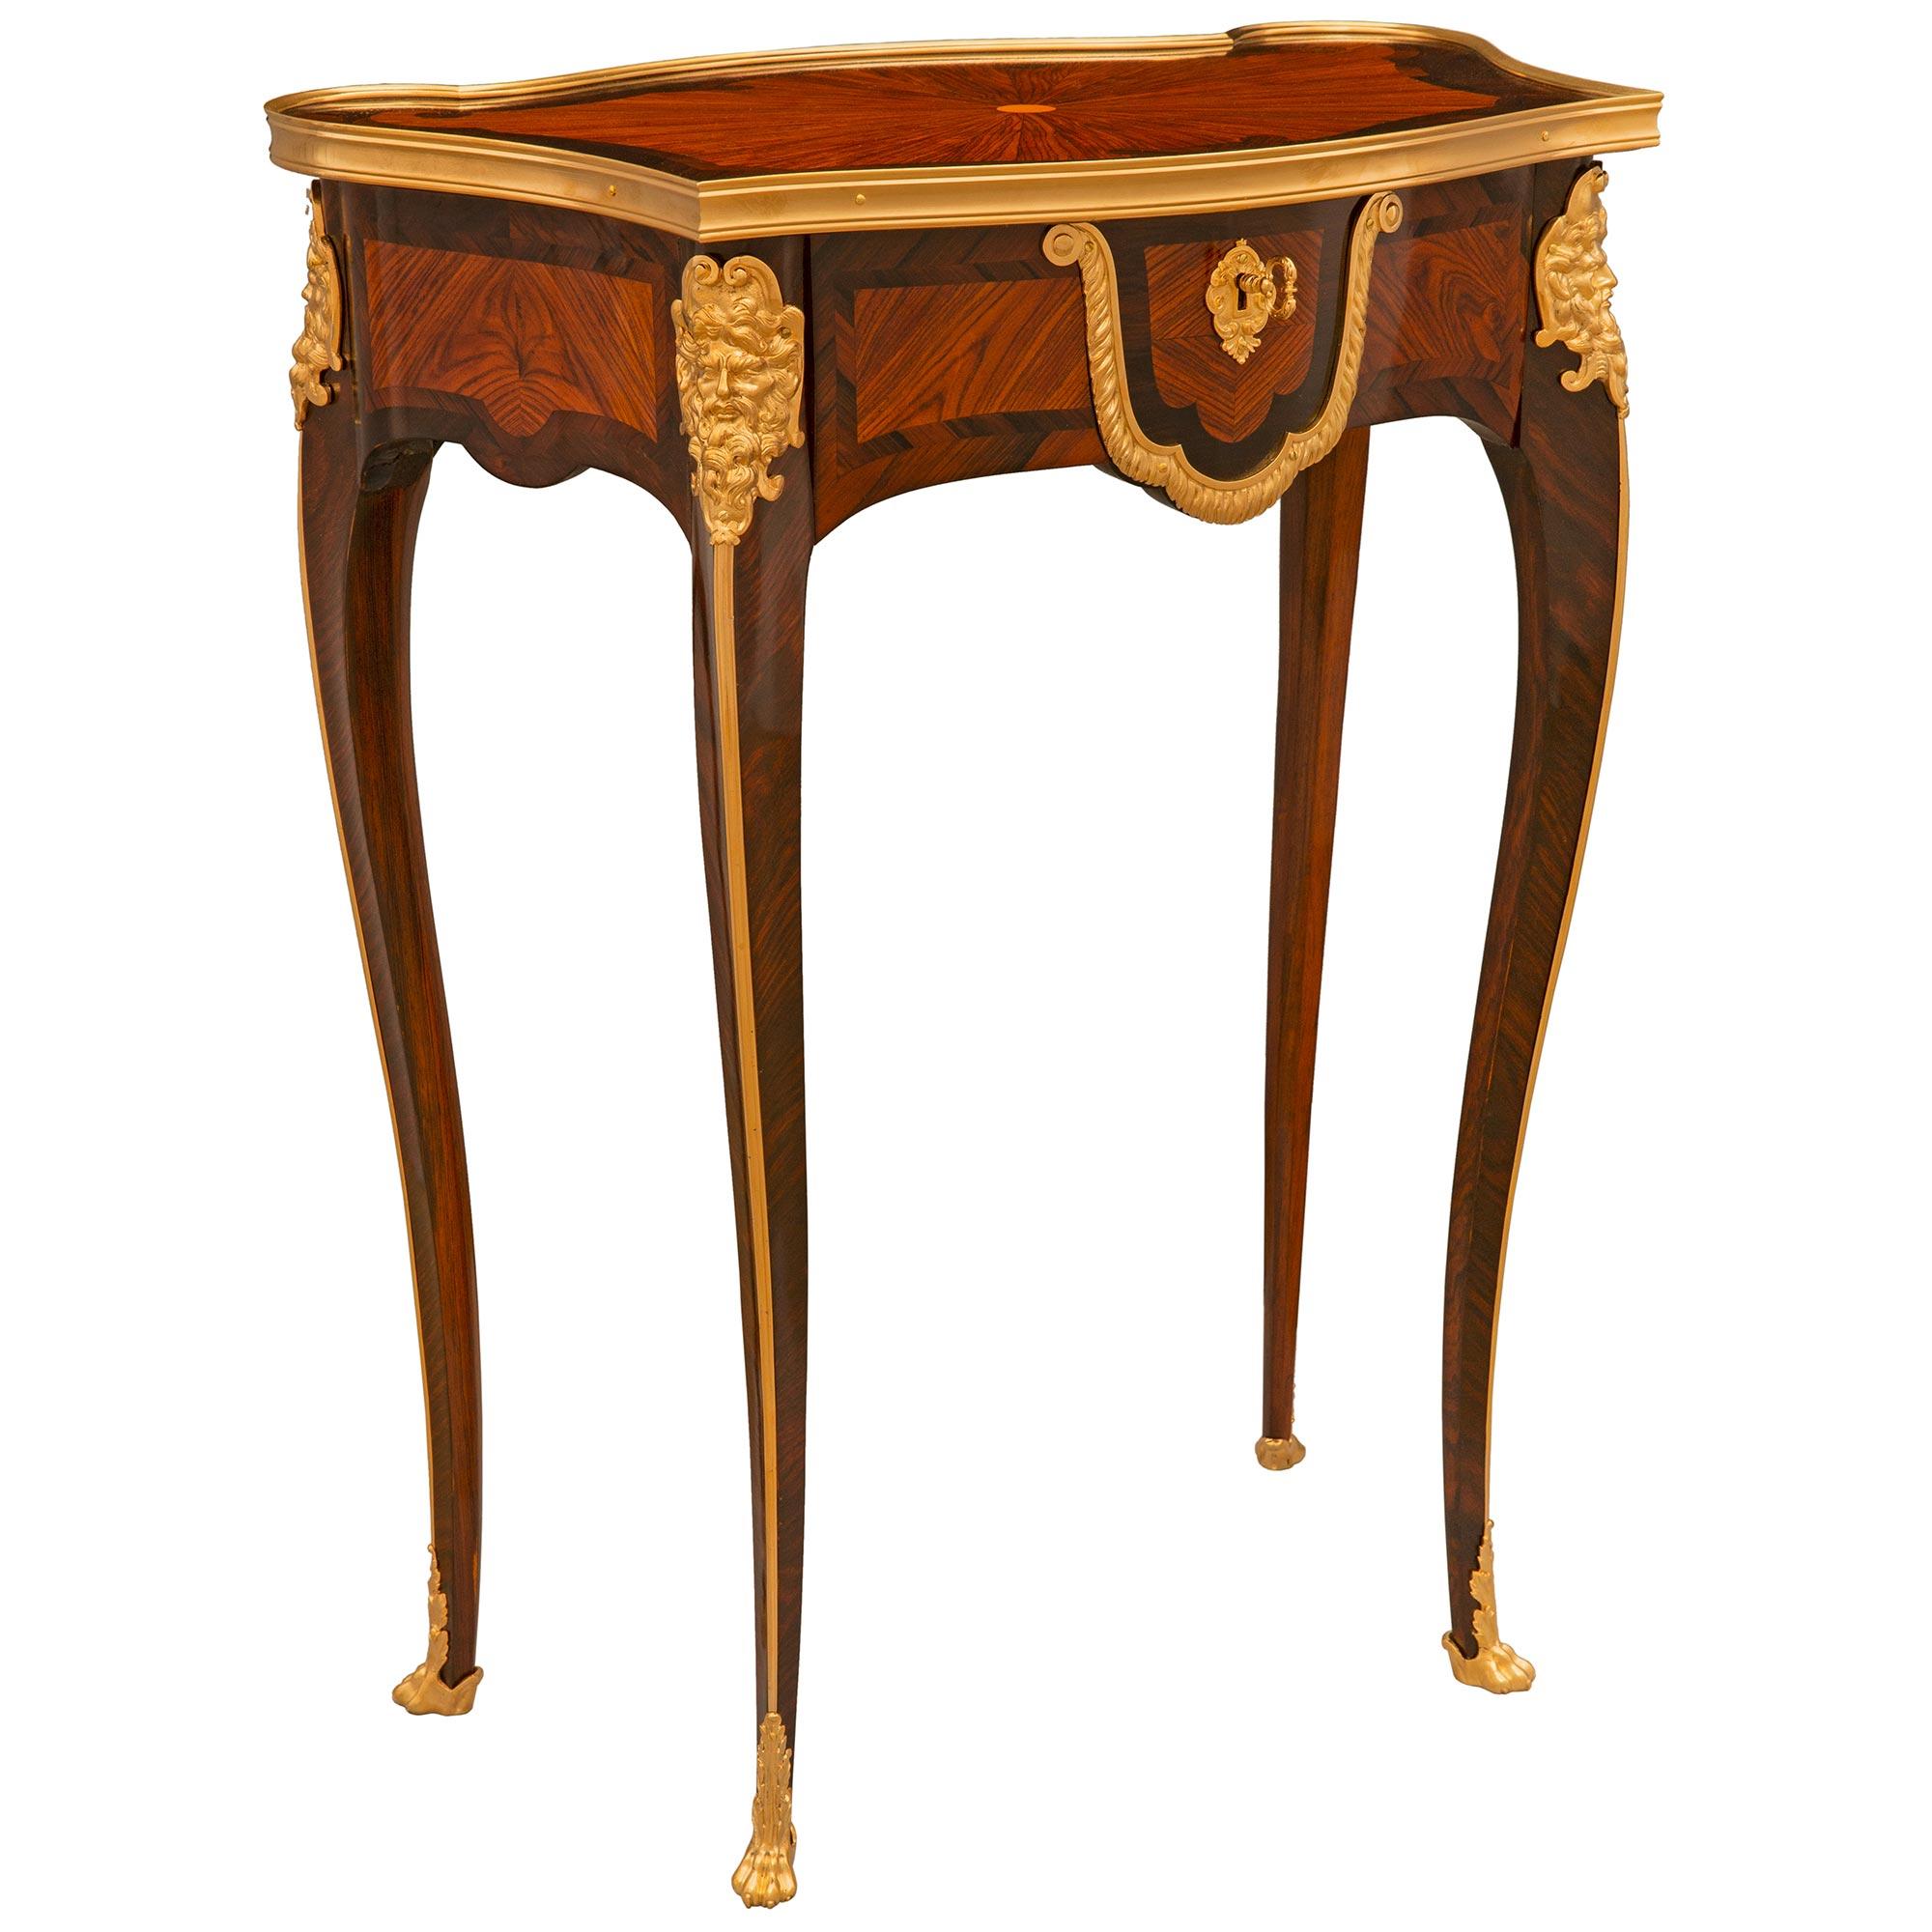 Belle Époque French 19th Century Belle Epoque Period Tulipwood, Kingwood & Ormolu Side Table For Sale